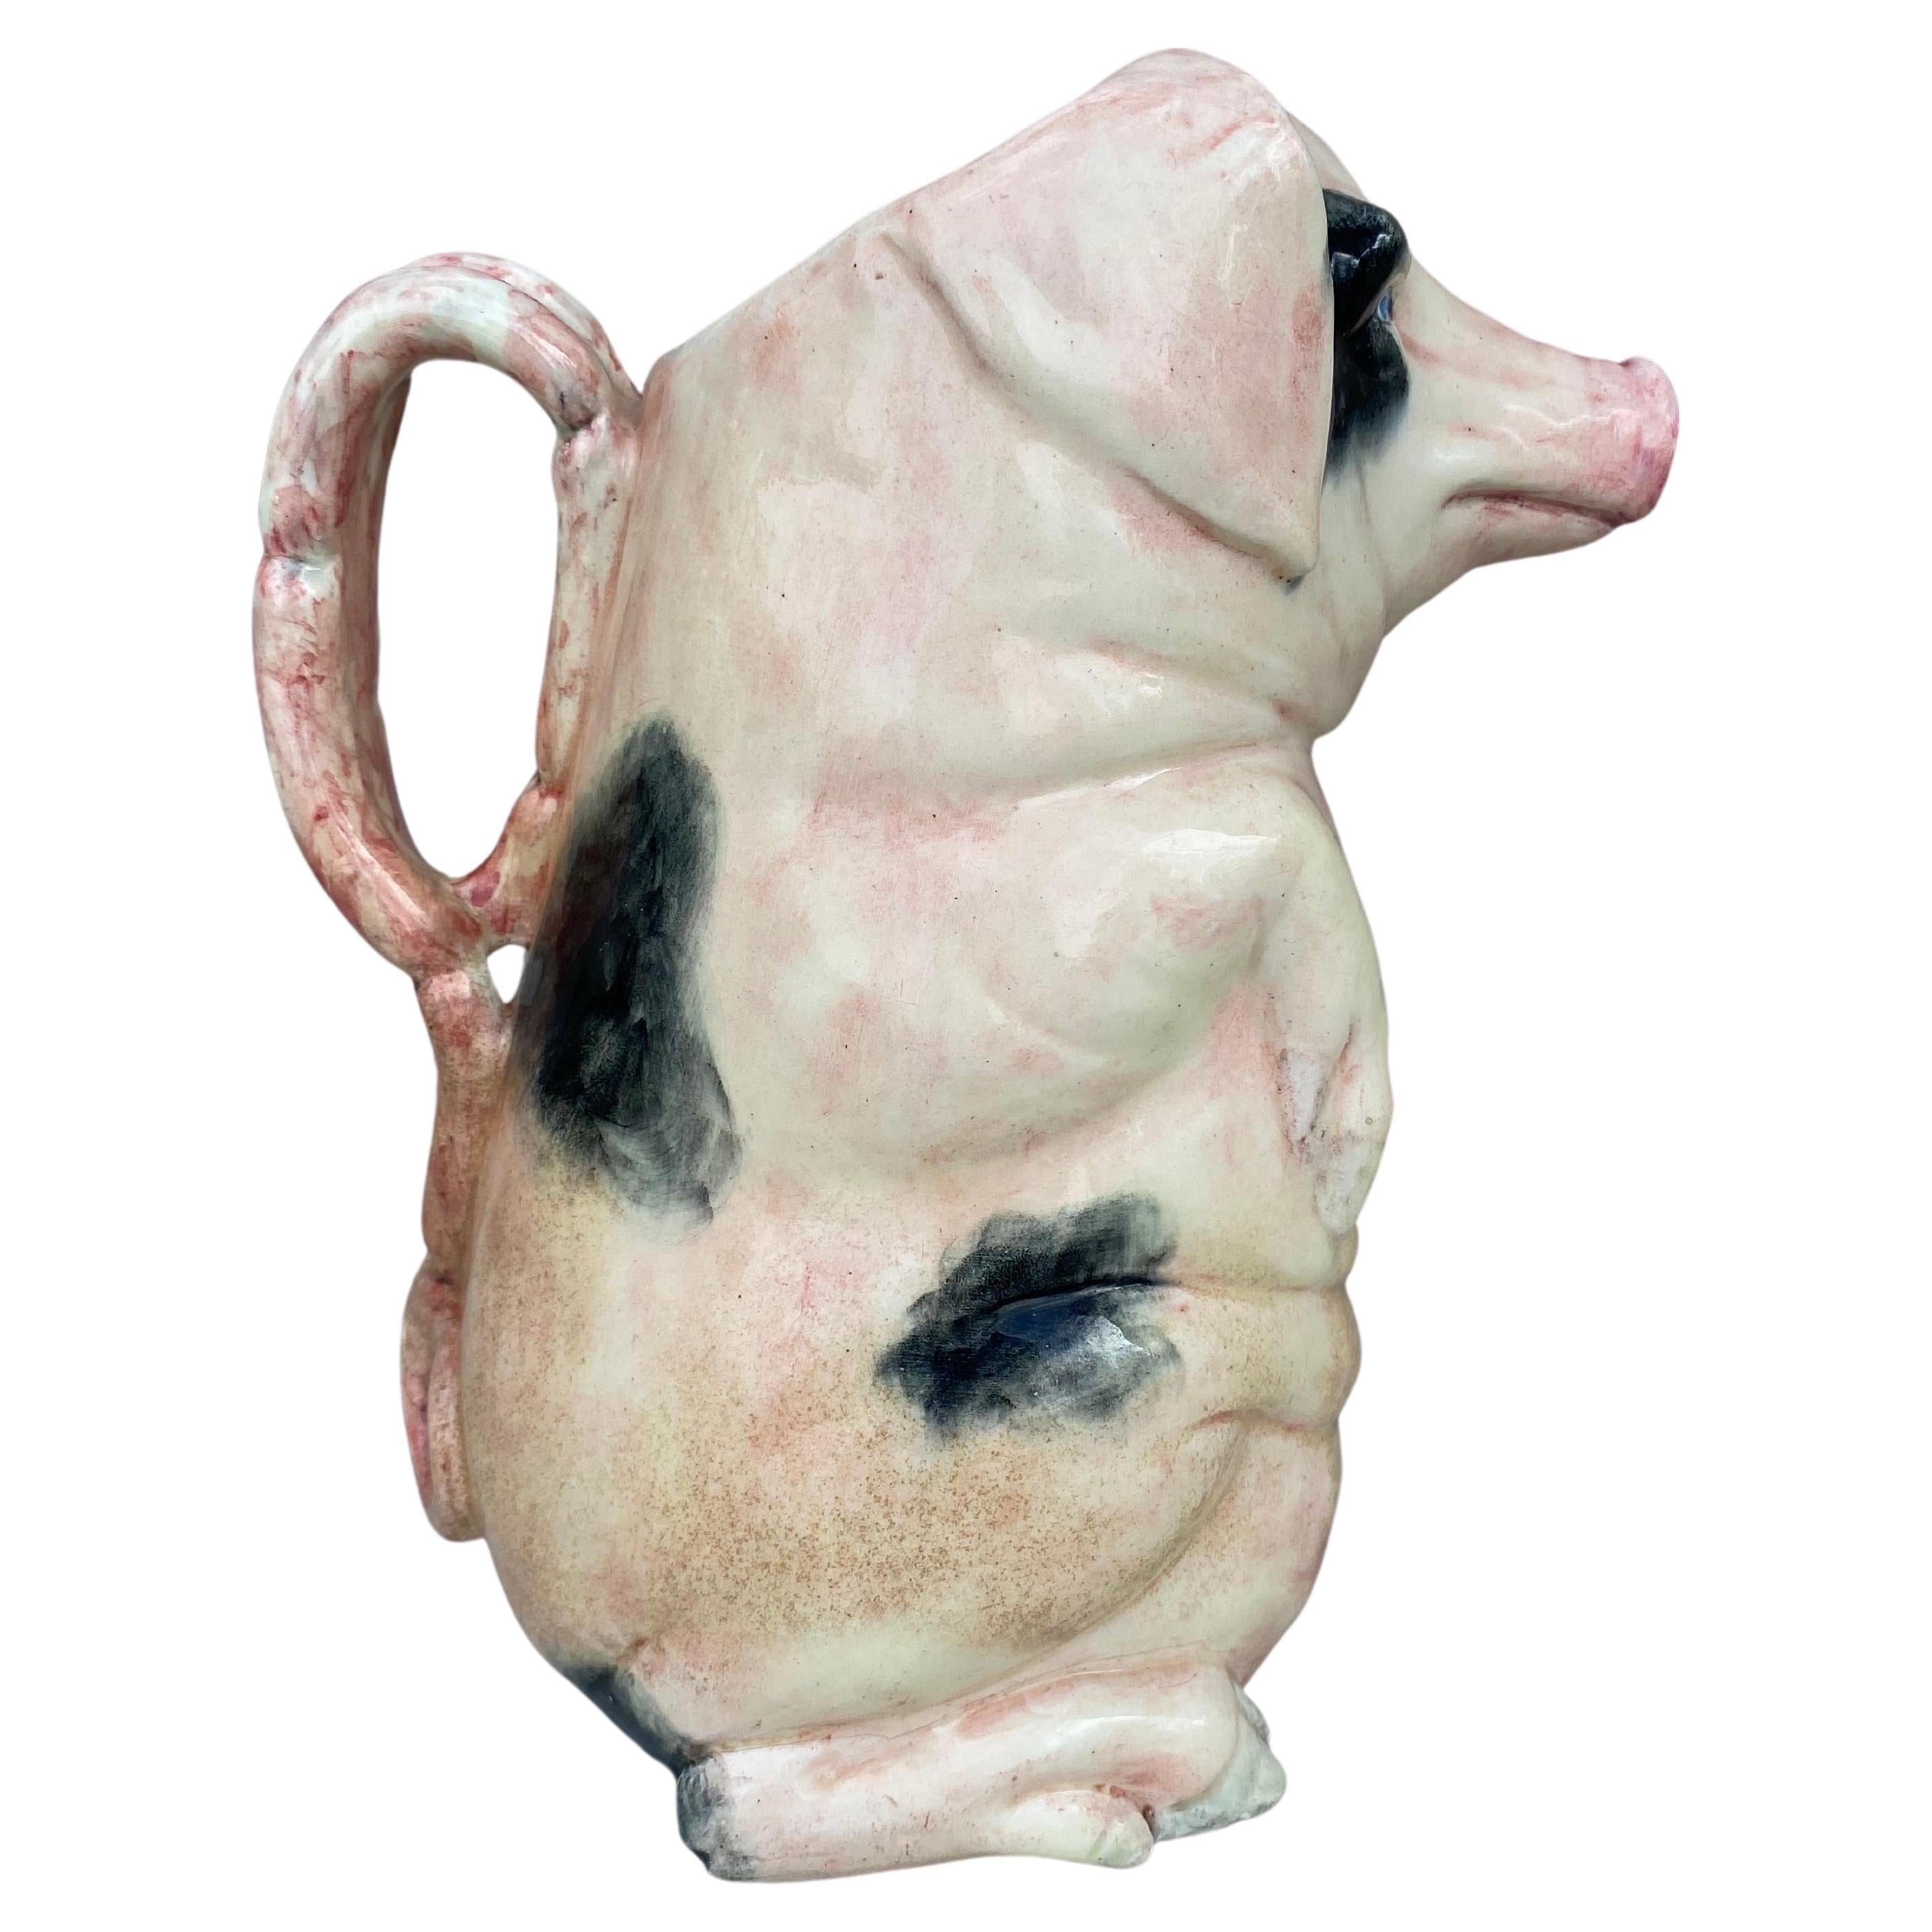 Very Large 19th Century Rare French Majolica Pig Pitcher signed Delphin Massier.
Height / 10.2 inches.